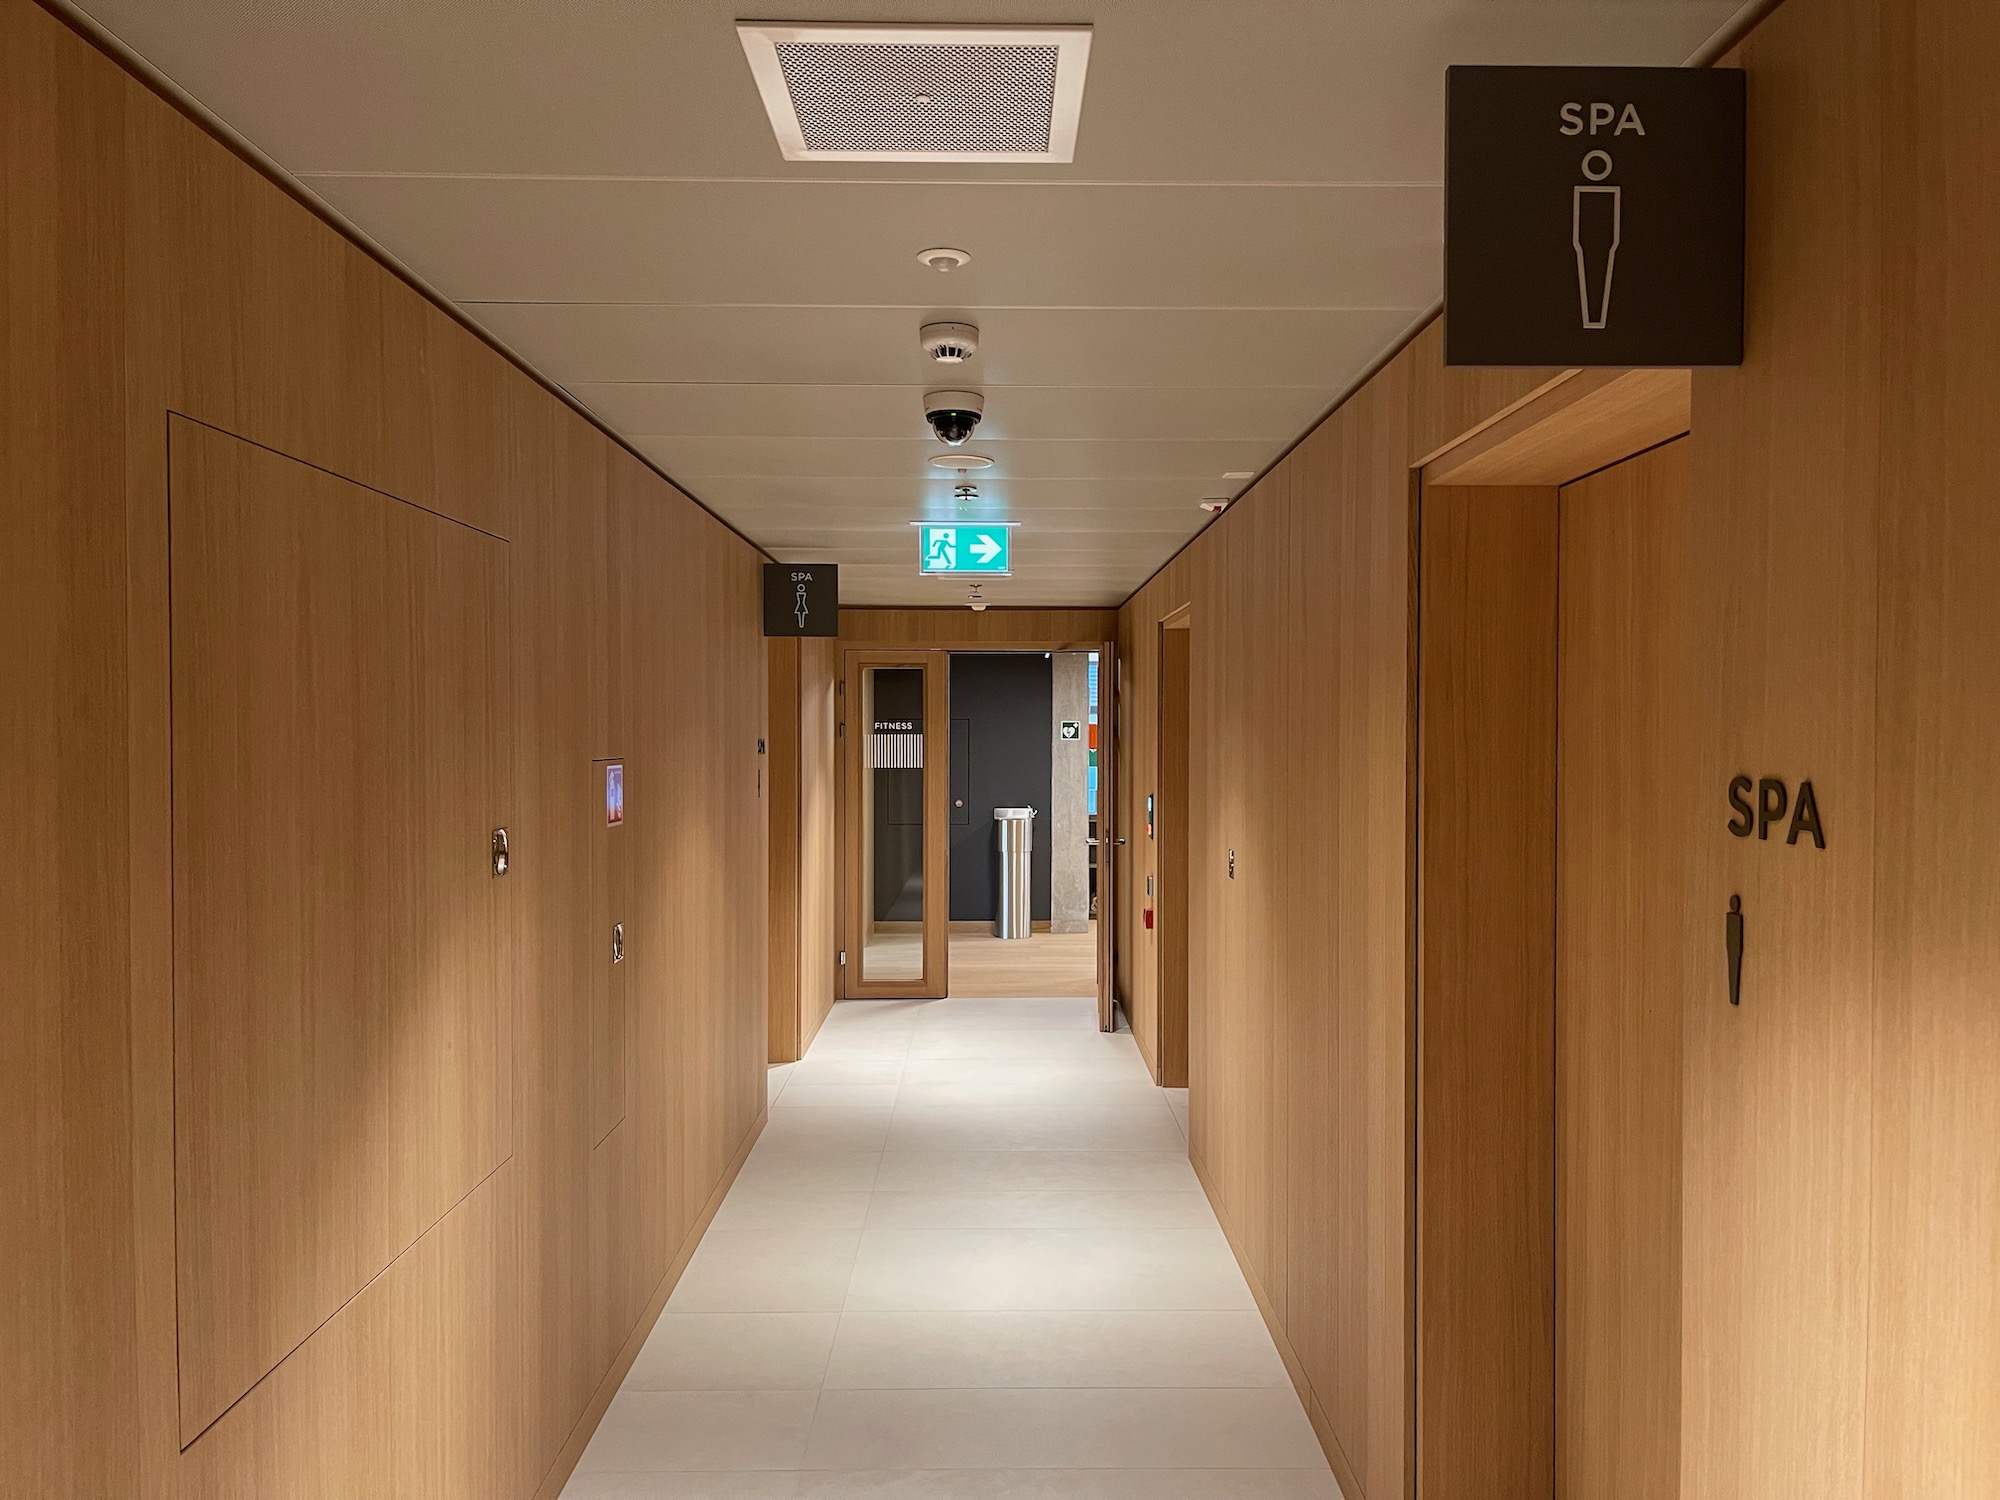 a long hallway with wooden walls and signs